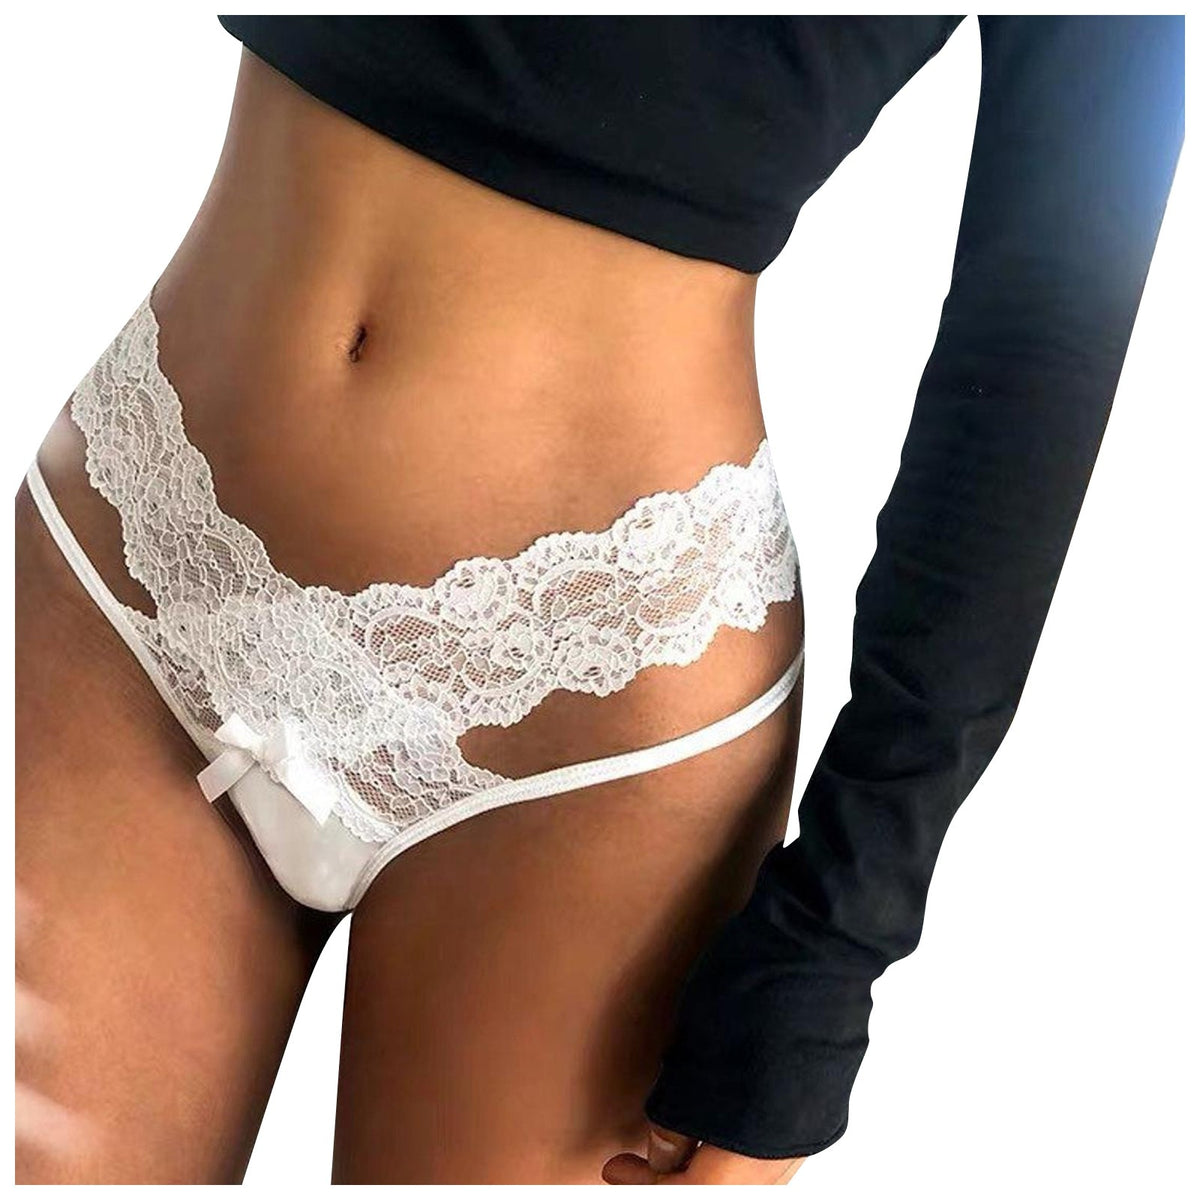 Lace Thong Panties T back Lingerie Soft Comfortable Elegant Sexy Nightwear Female Opening Crotch Pantie Underpants Sex Brief